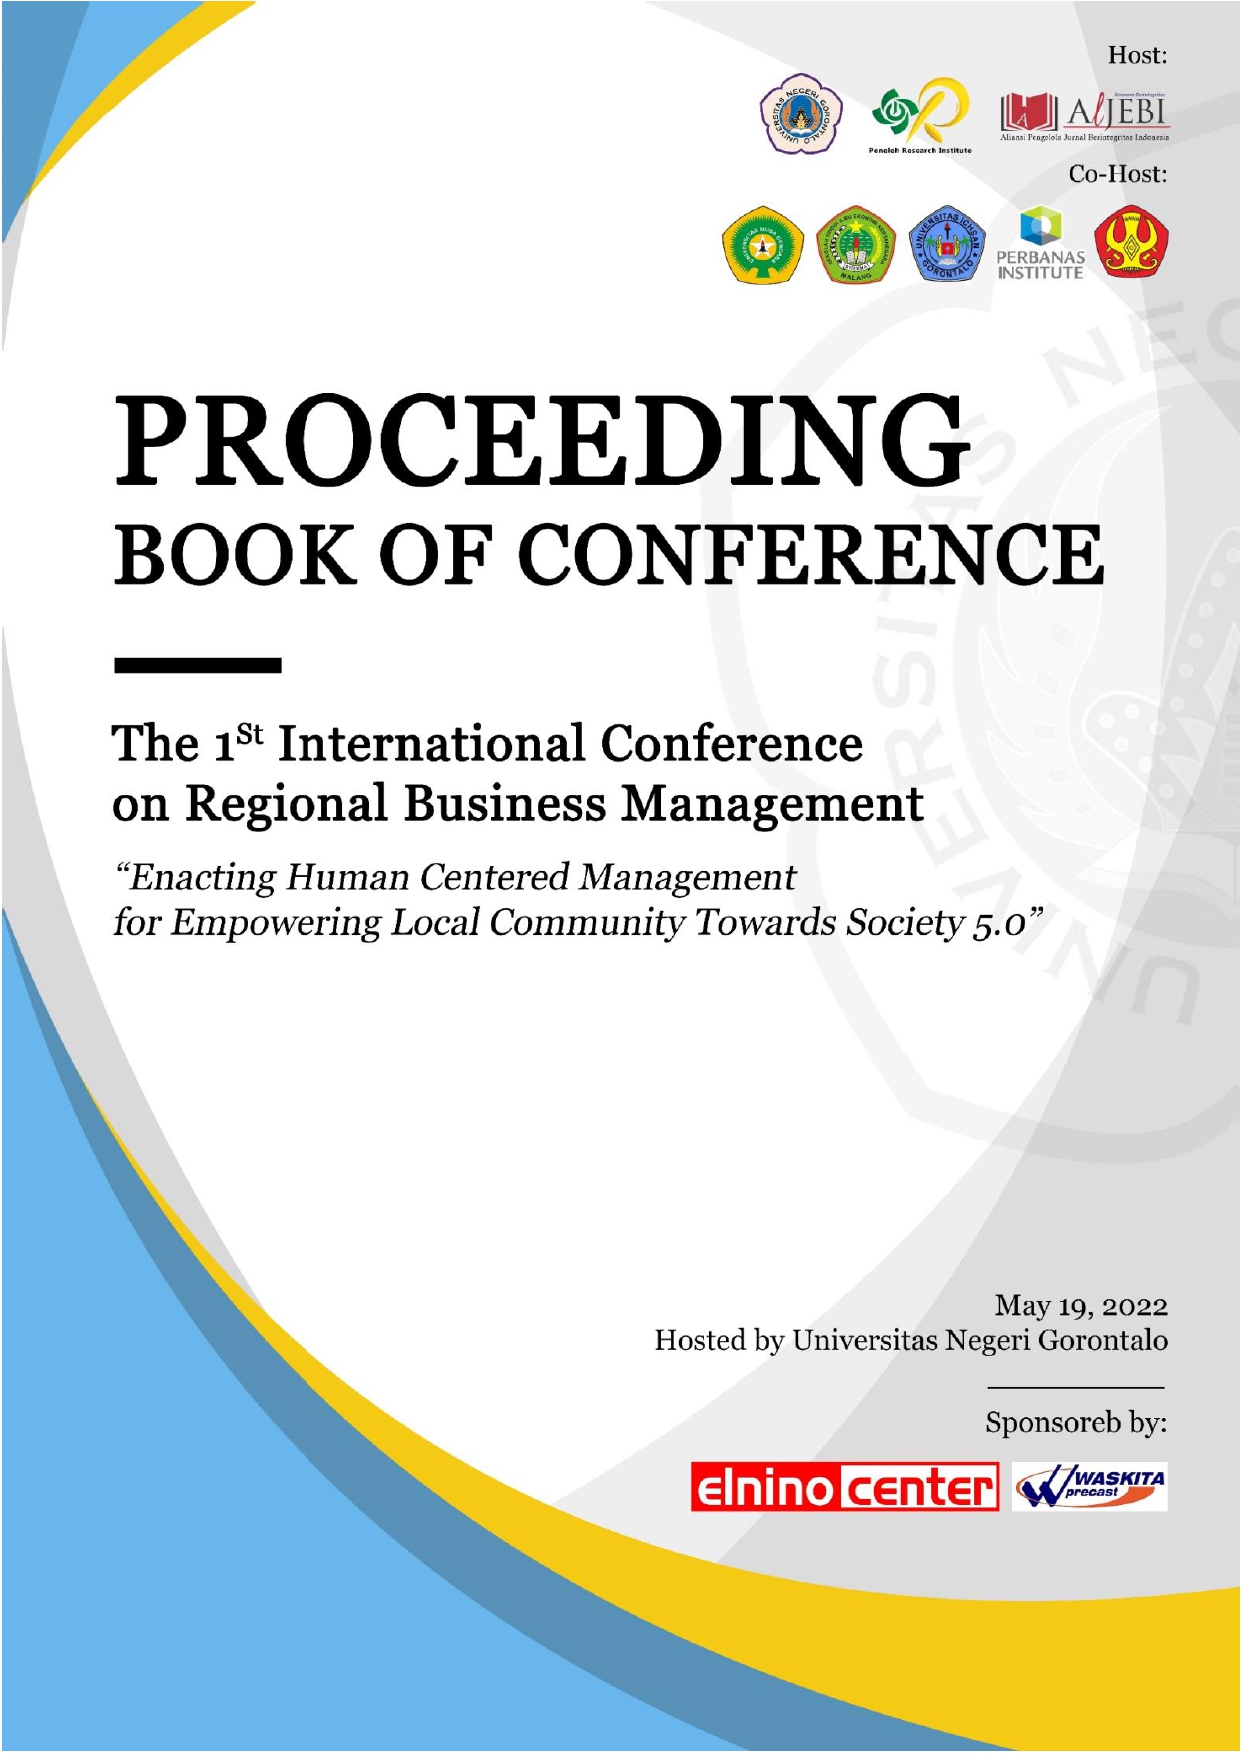 Proceeding Book of Conference The 1st International Conference of Regional Business Management “Enacting Human Centered Management for Empowering Local Community towards Society 5.0, May, 19th 2022